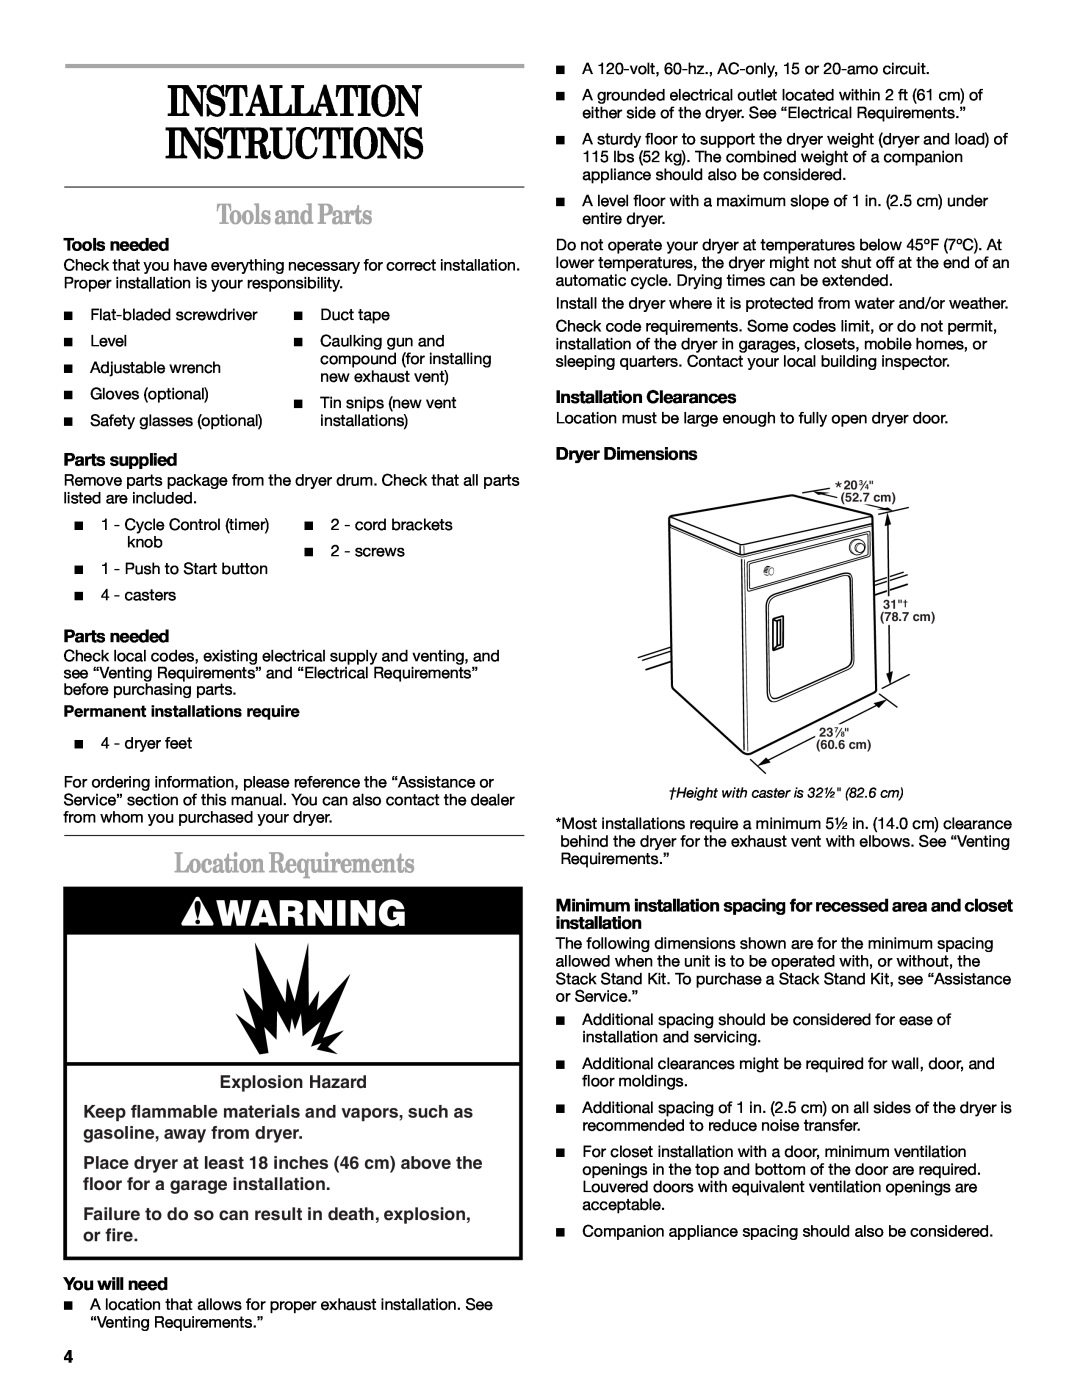 Whirlpool 3406879 manual Installation Instructions, Tools and Parts, Location Requirements, Tools needed, Parts supplied 